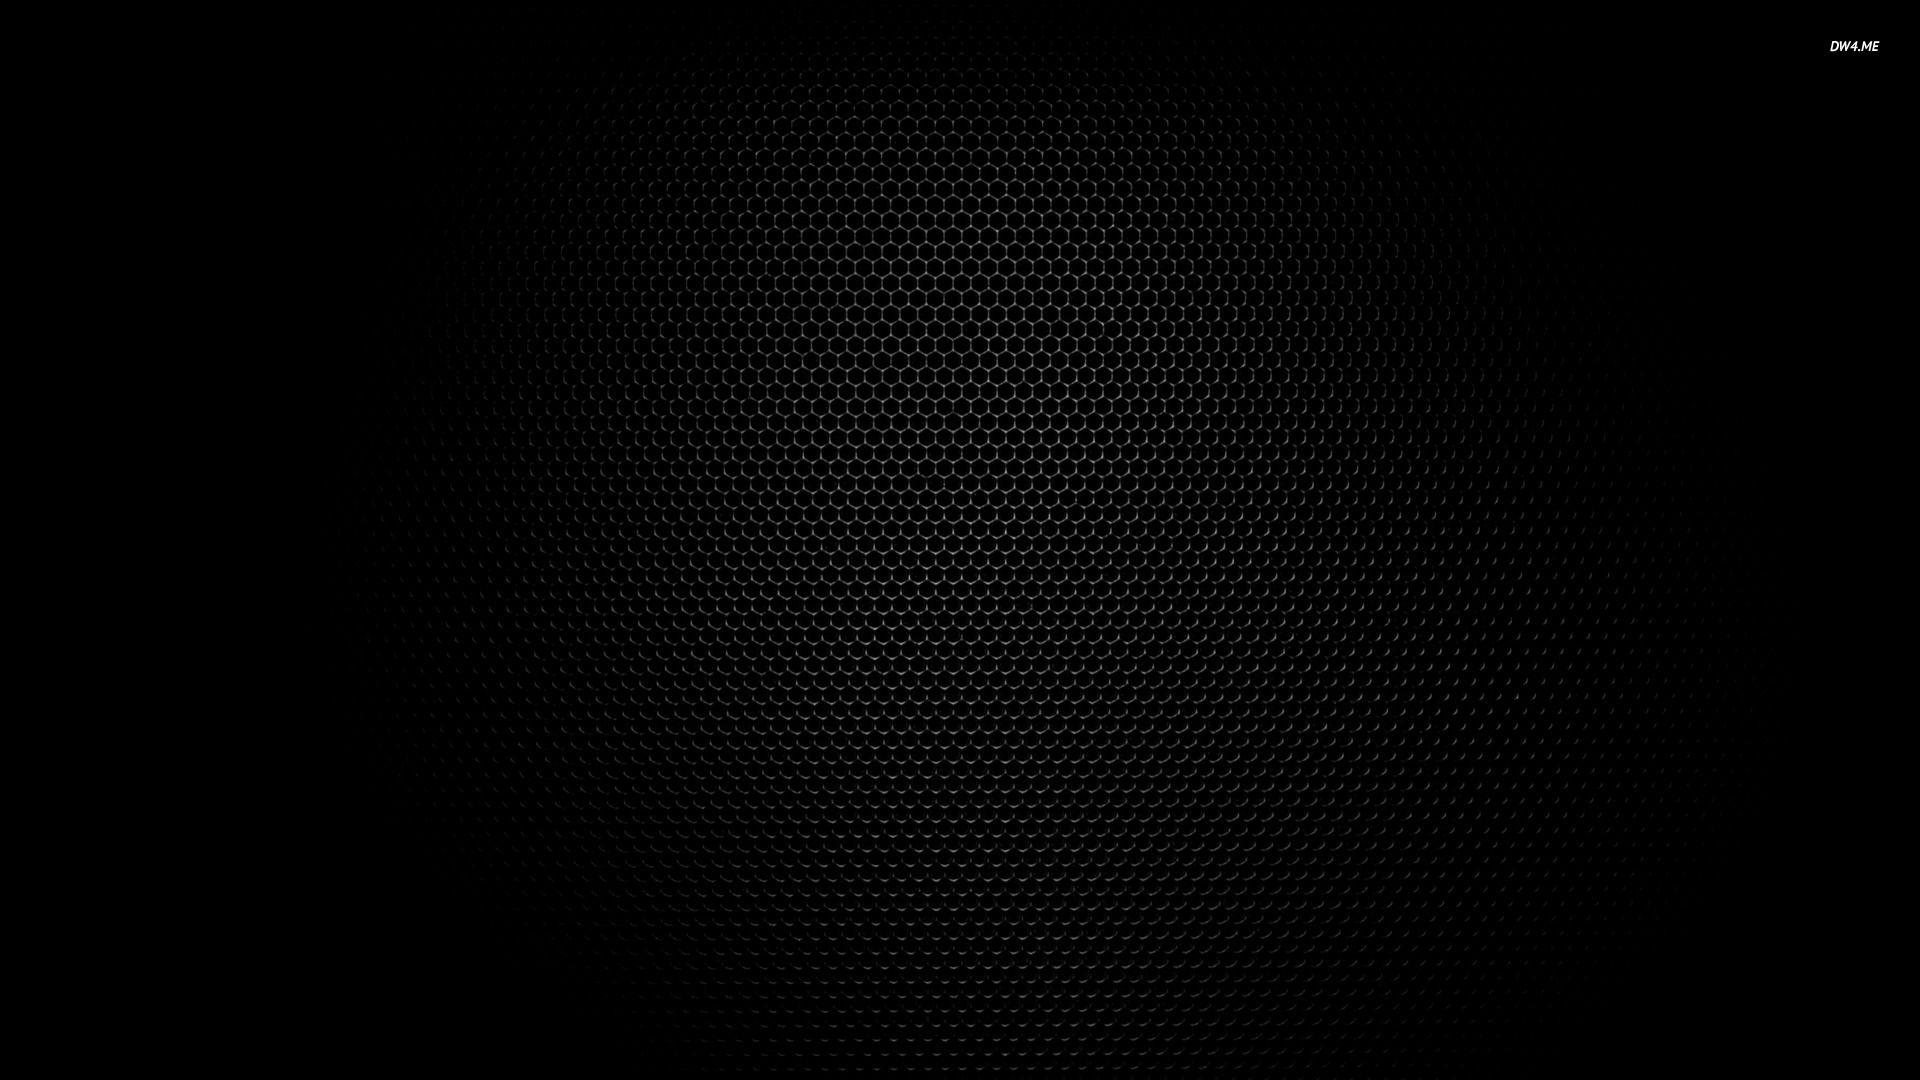 25 Excellent black screen wallpaper for desktop You Can Download It For ...